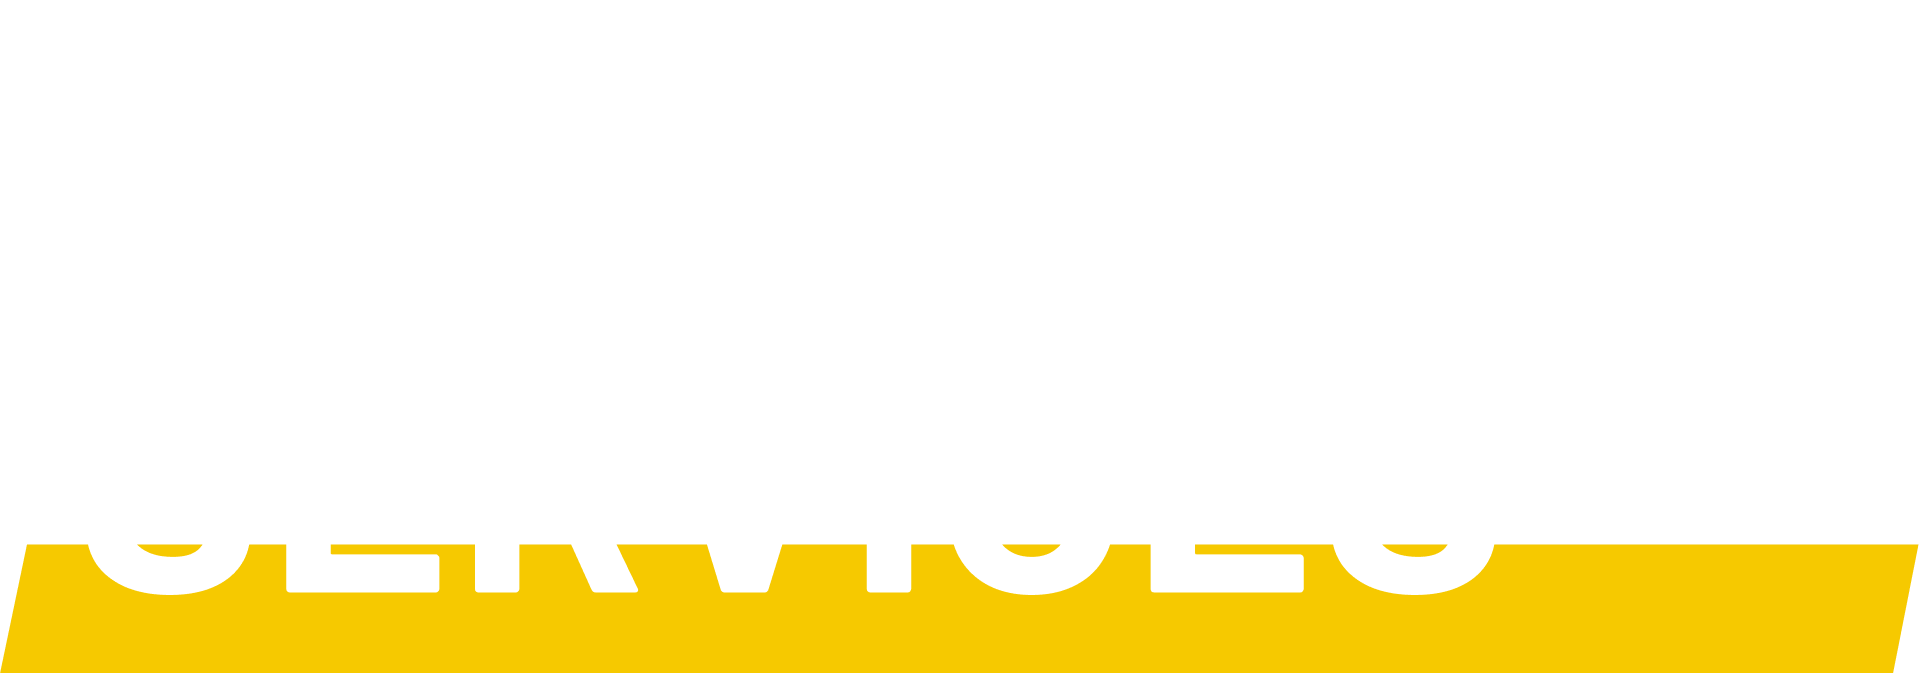 list-of-services